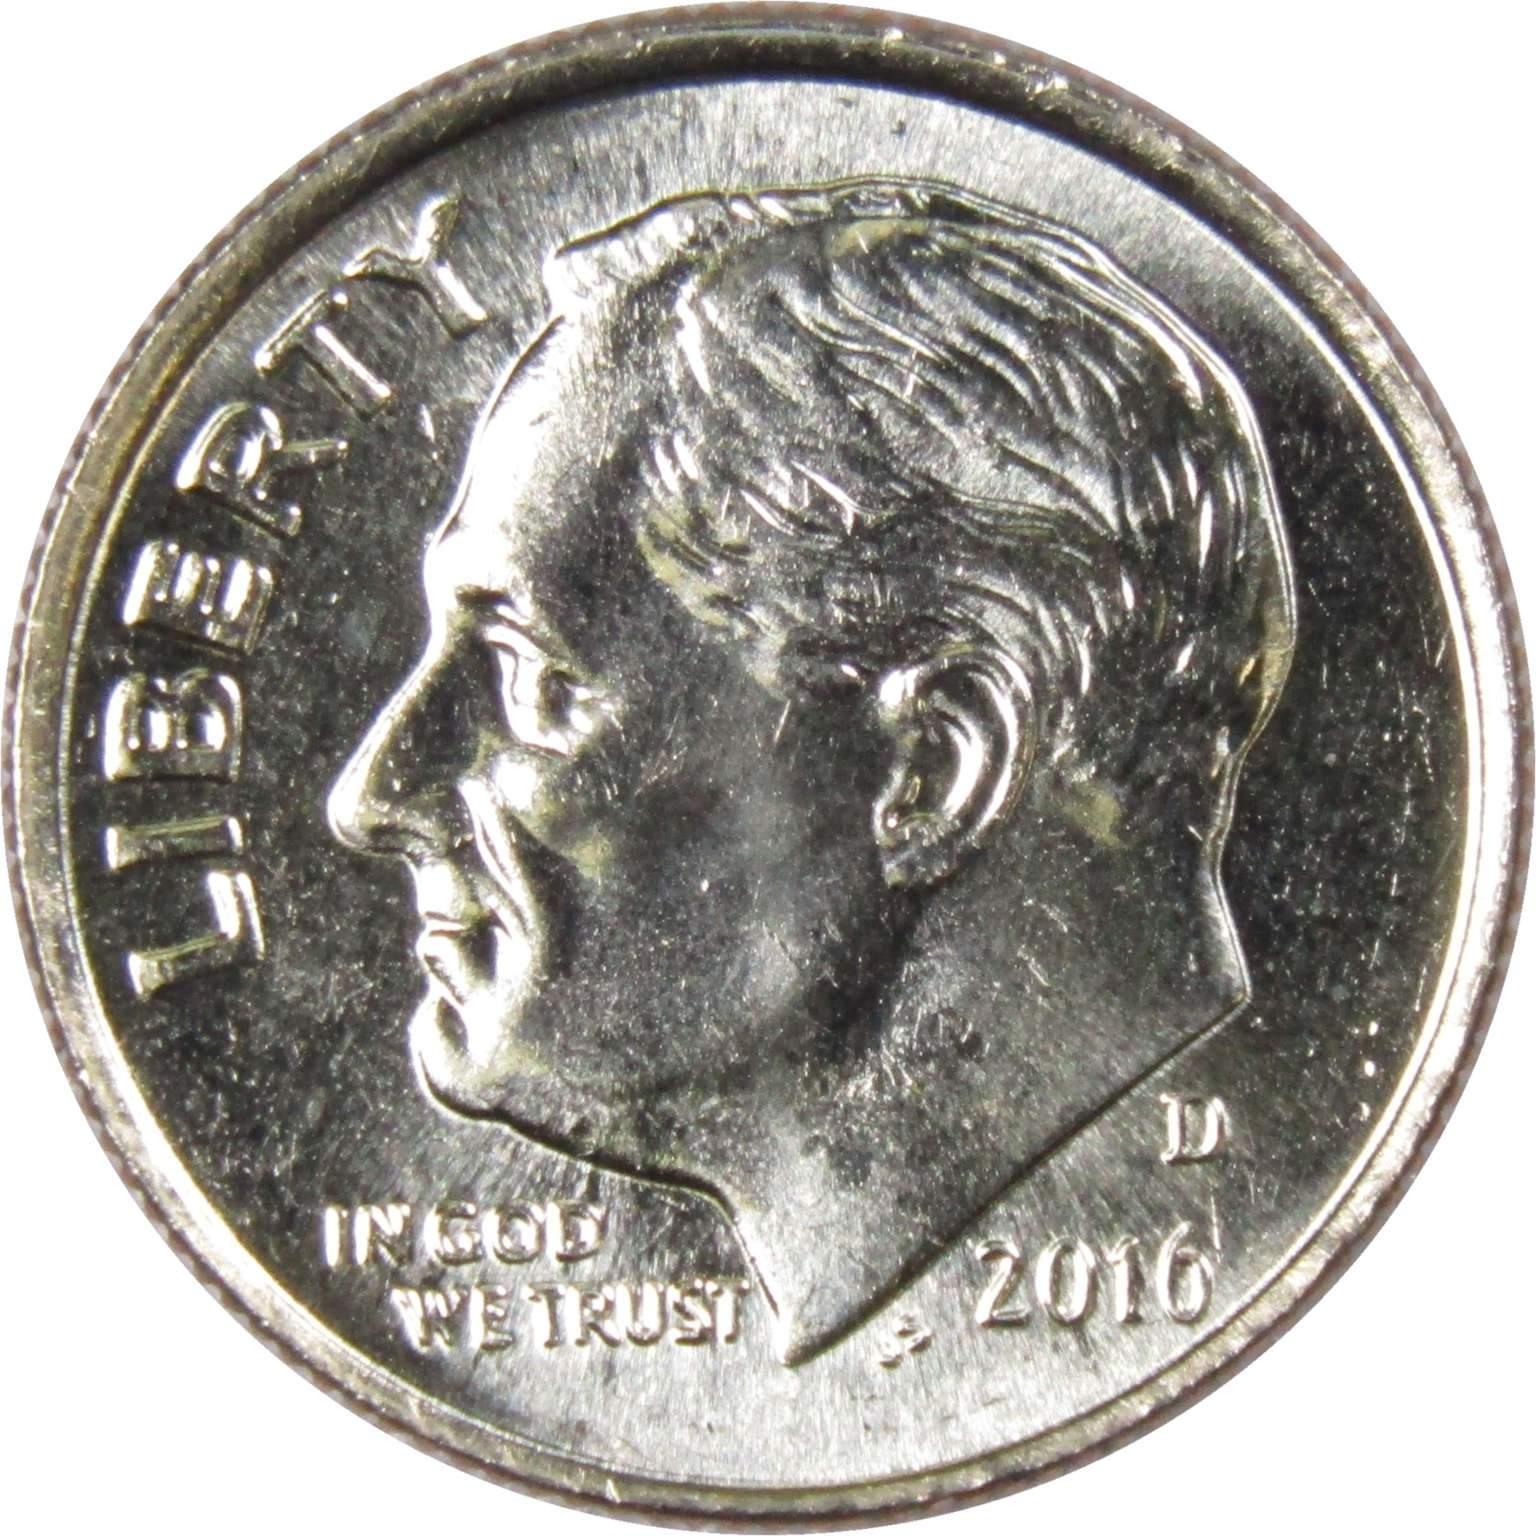 2016 D Roosevelt Dime BU Uncirculated Mint State 10c US Coin Collectible